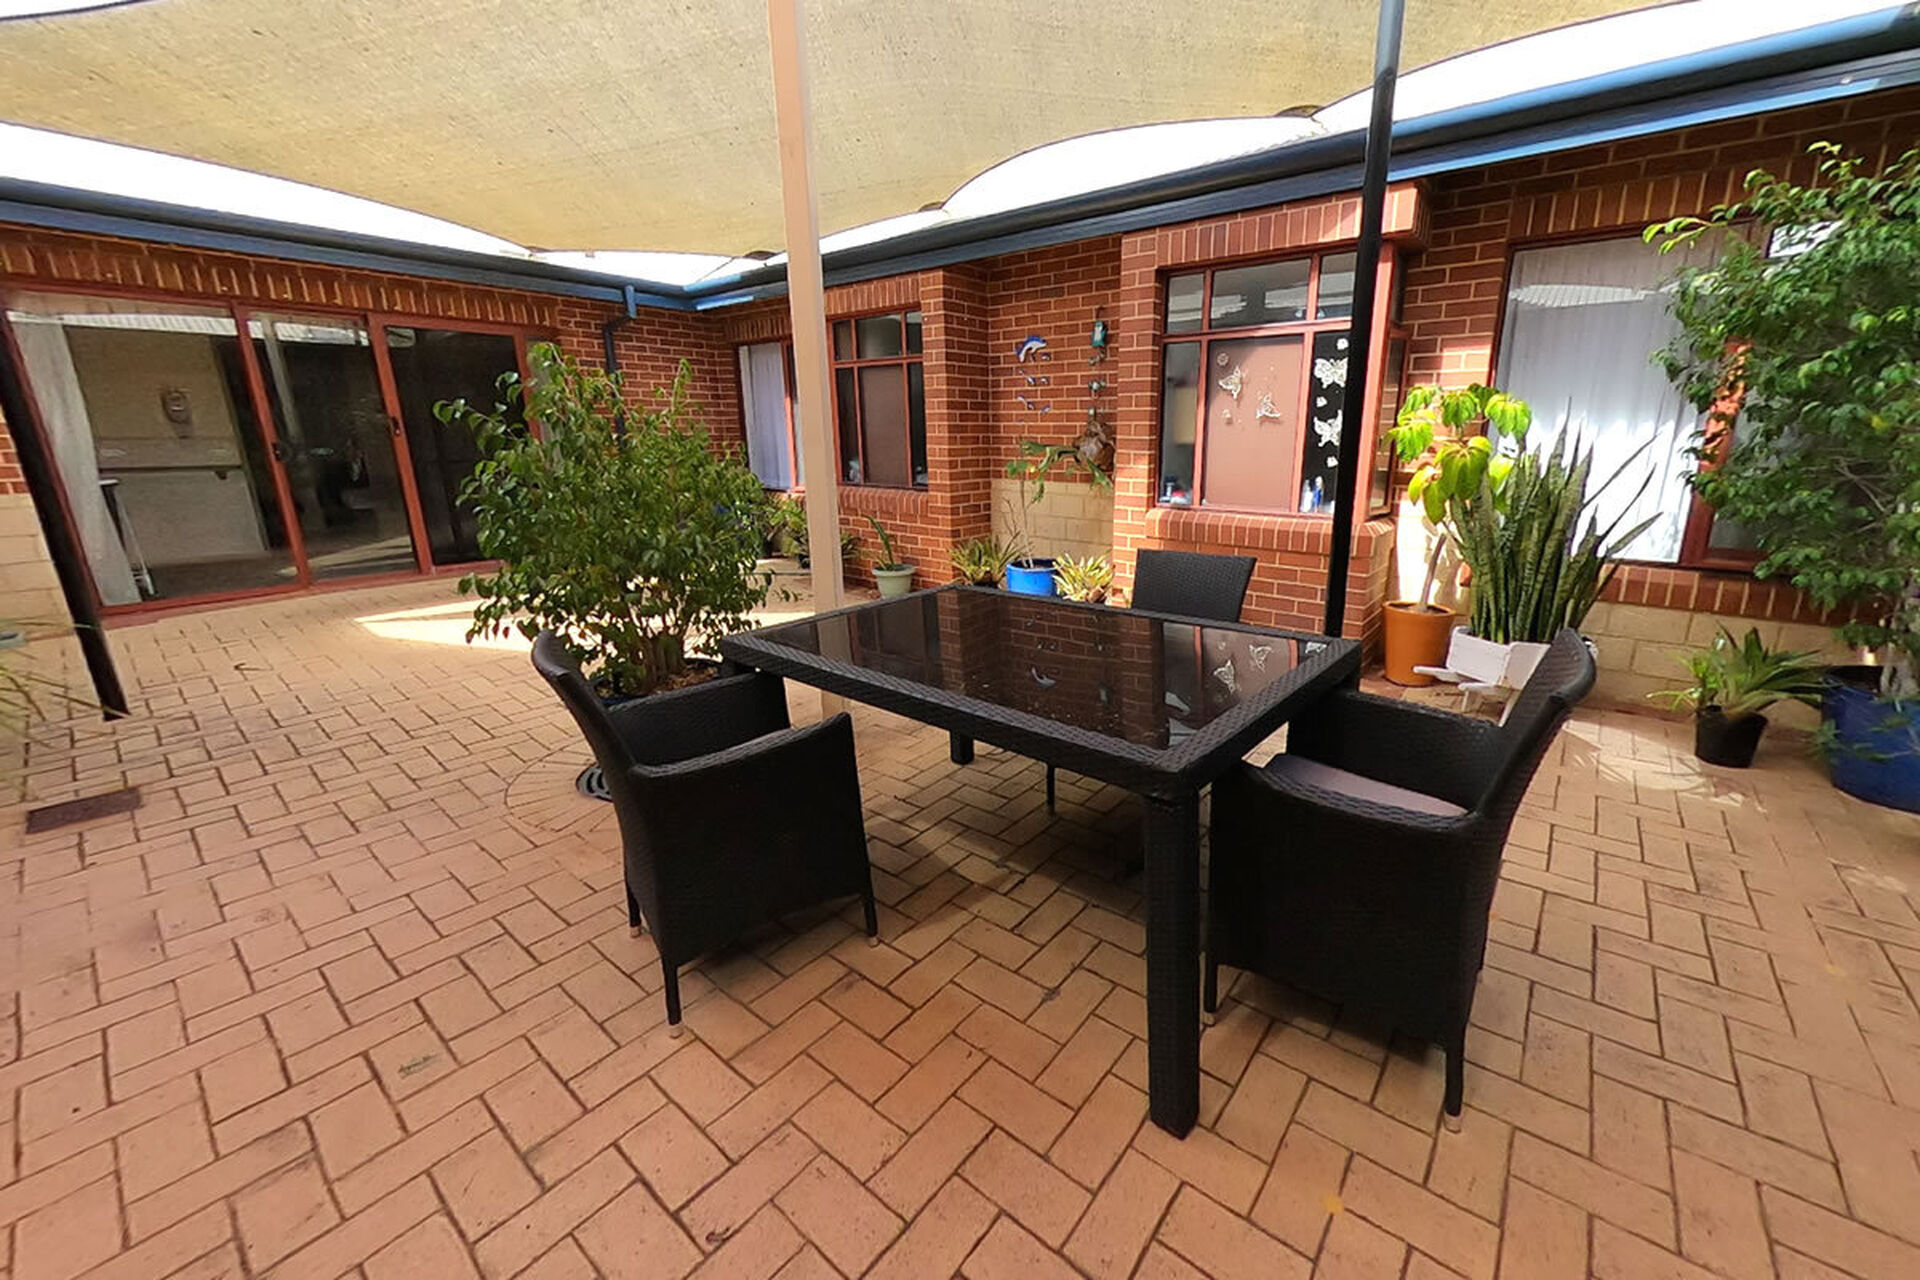 external sitting area baptistcare at david buttfield centre aged care home in gwelup wa for nursing home residents to enjoy